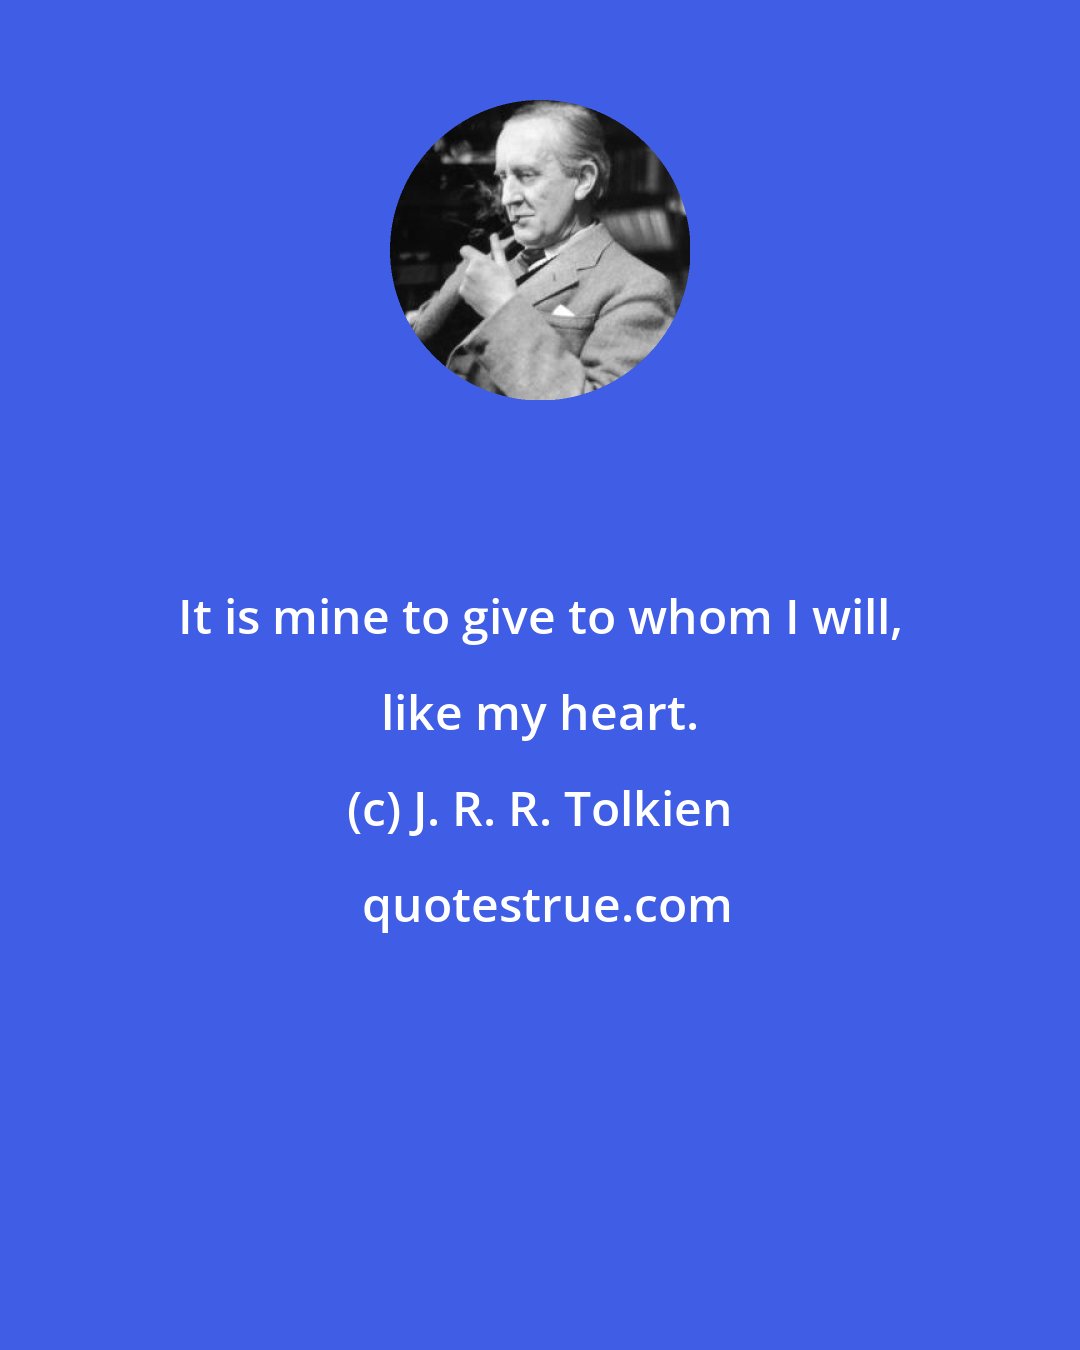 J. R. R. Tolkien: It is mine to give to whom I will, like my heart.